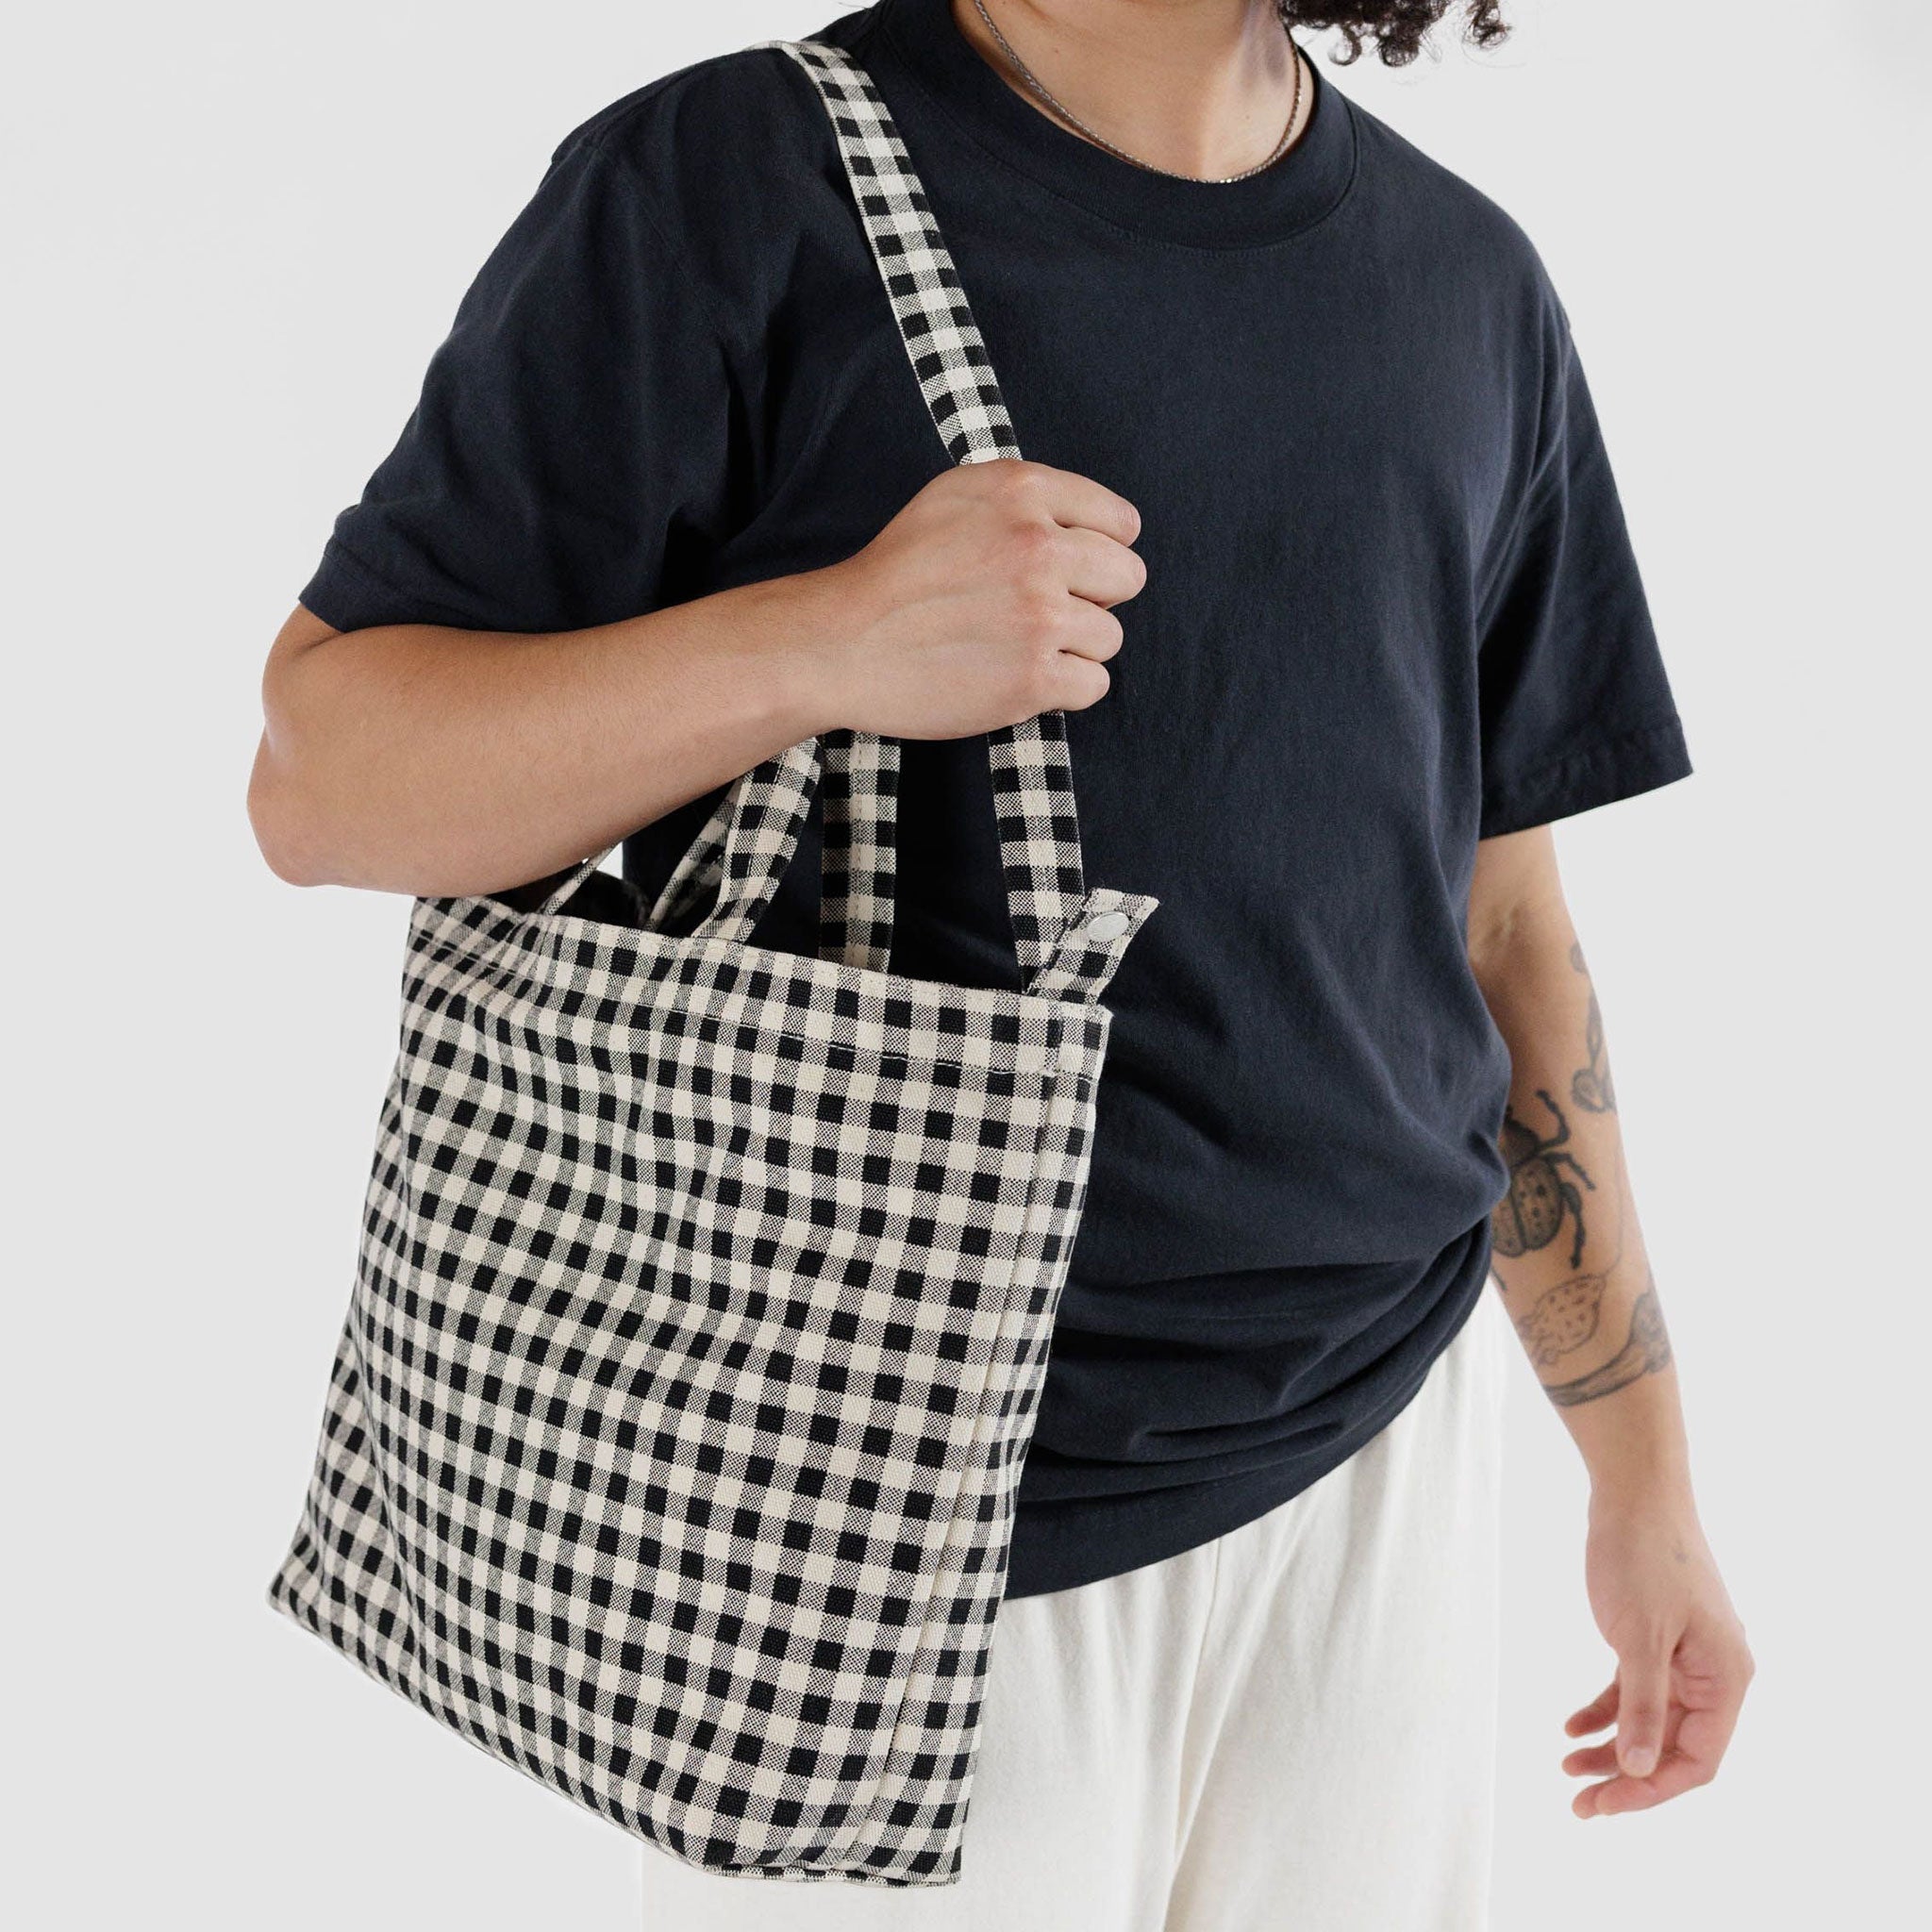 On a white background is a black and white gingham printed canvas bag with a hand strap and a longer adjustable shoulder strap.